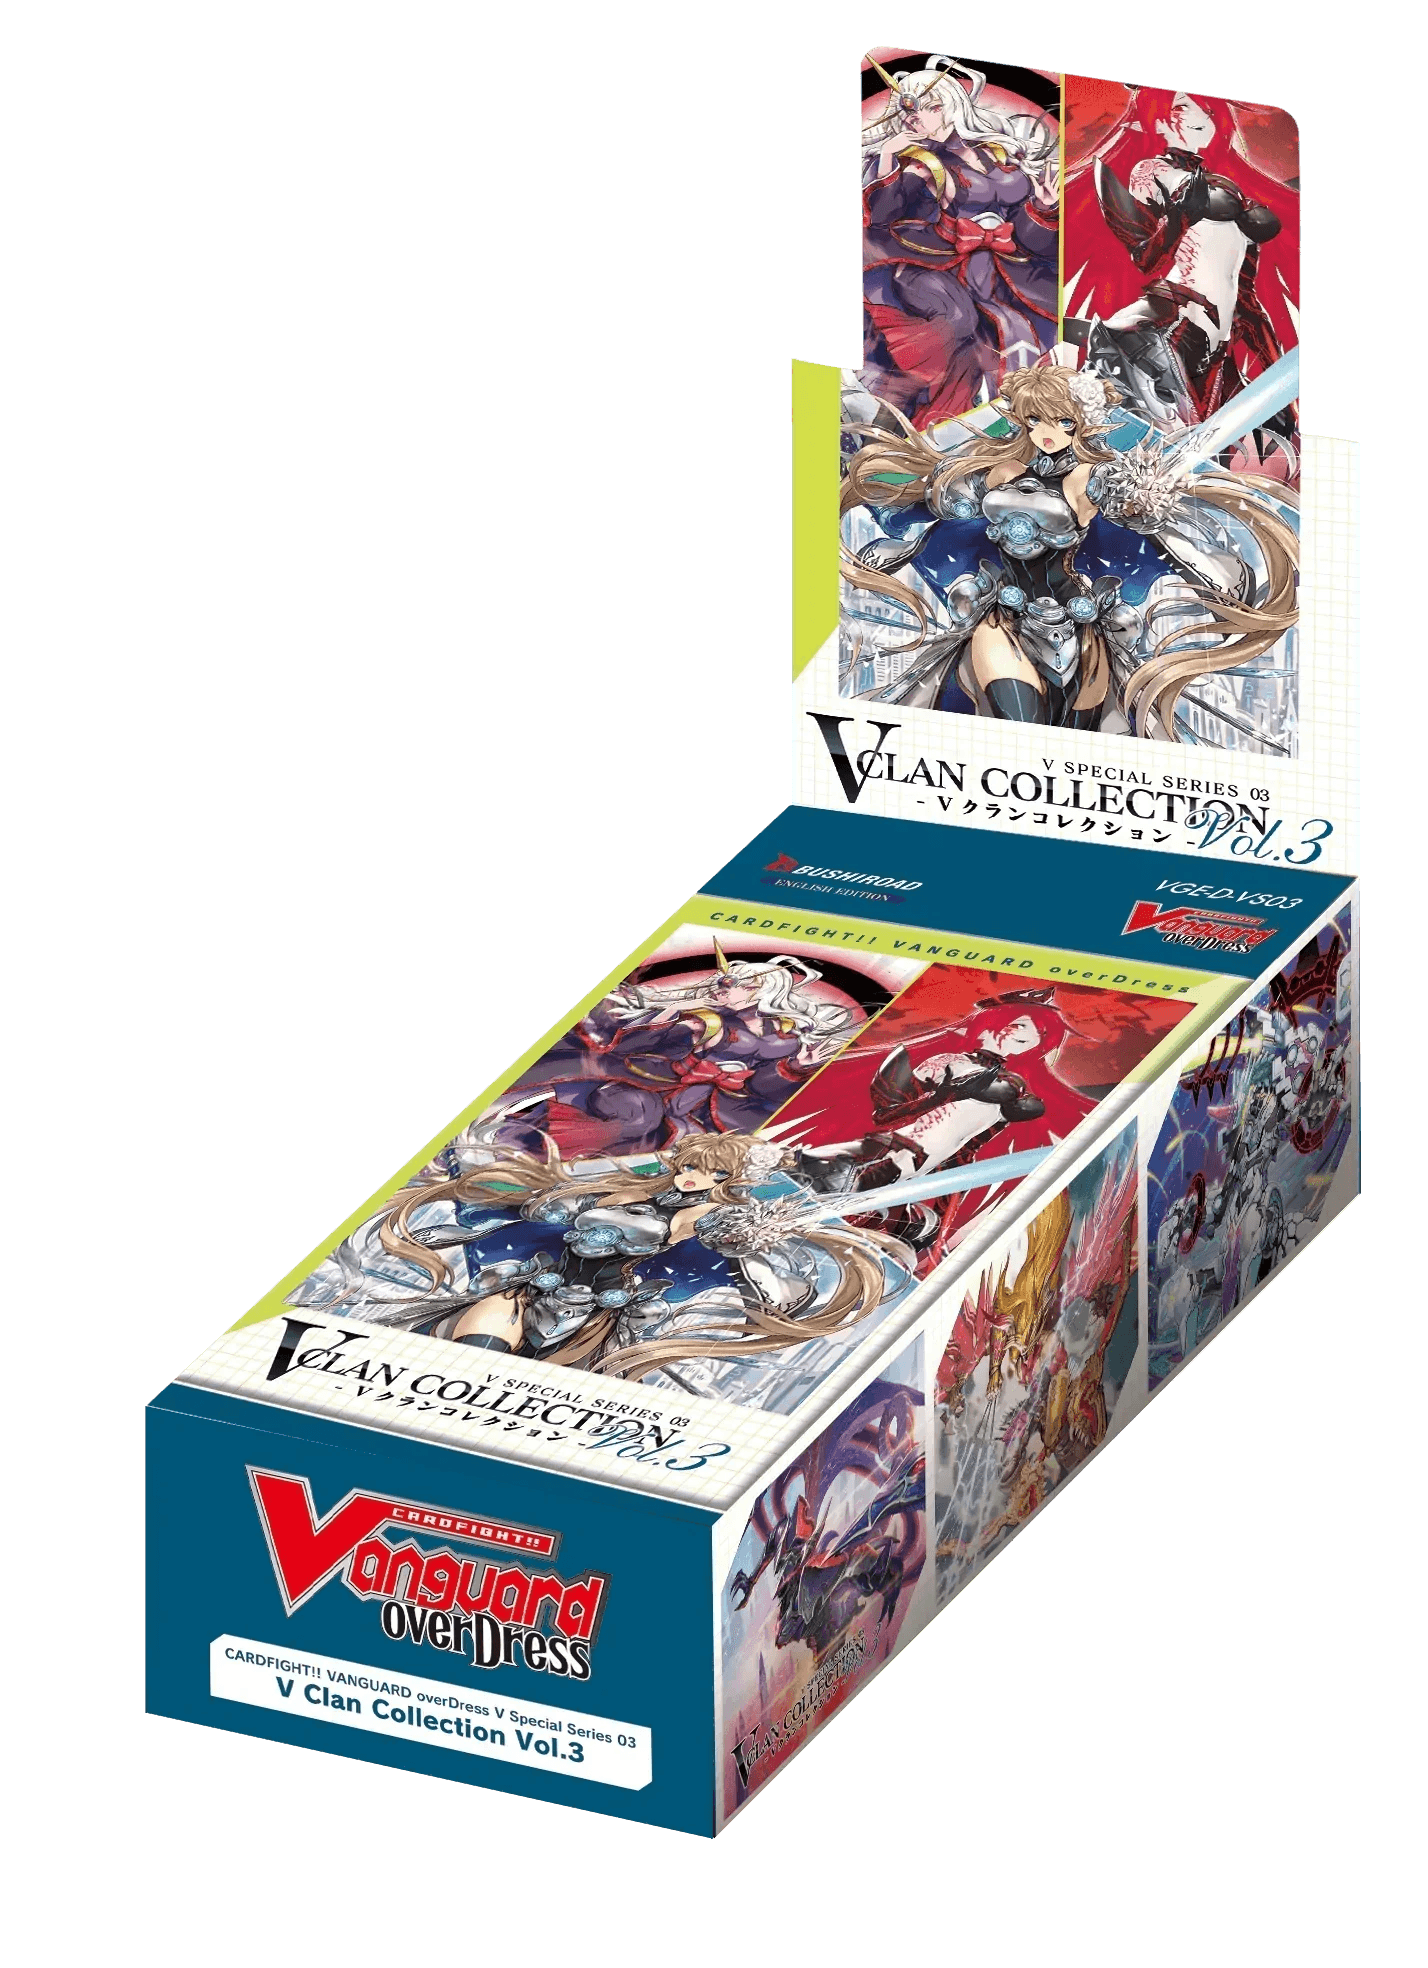 Cardfight!! Vanguard - OverDress: V Special Series - V Clan Collection Vol.3 Booster Box - The Card Vault